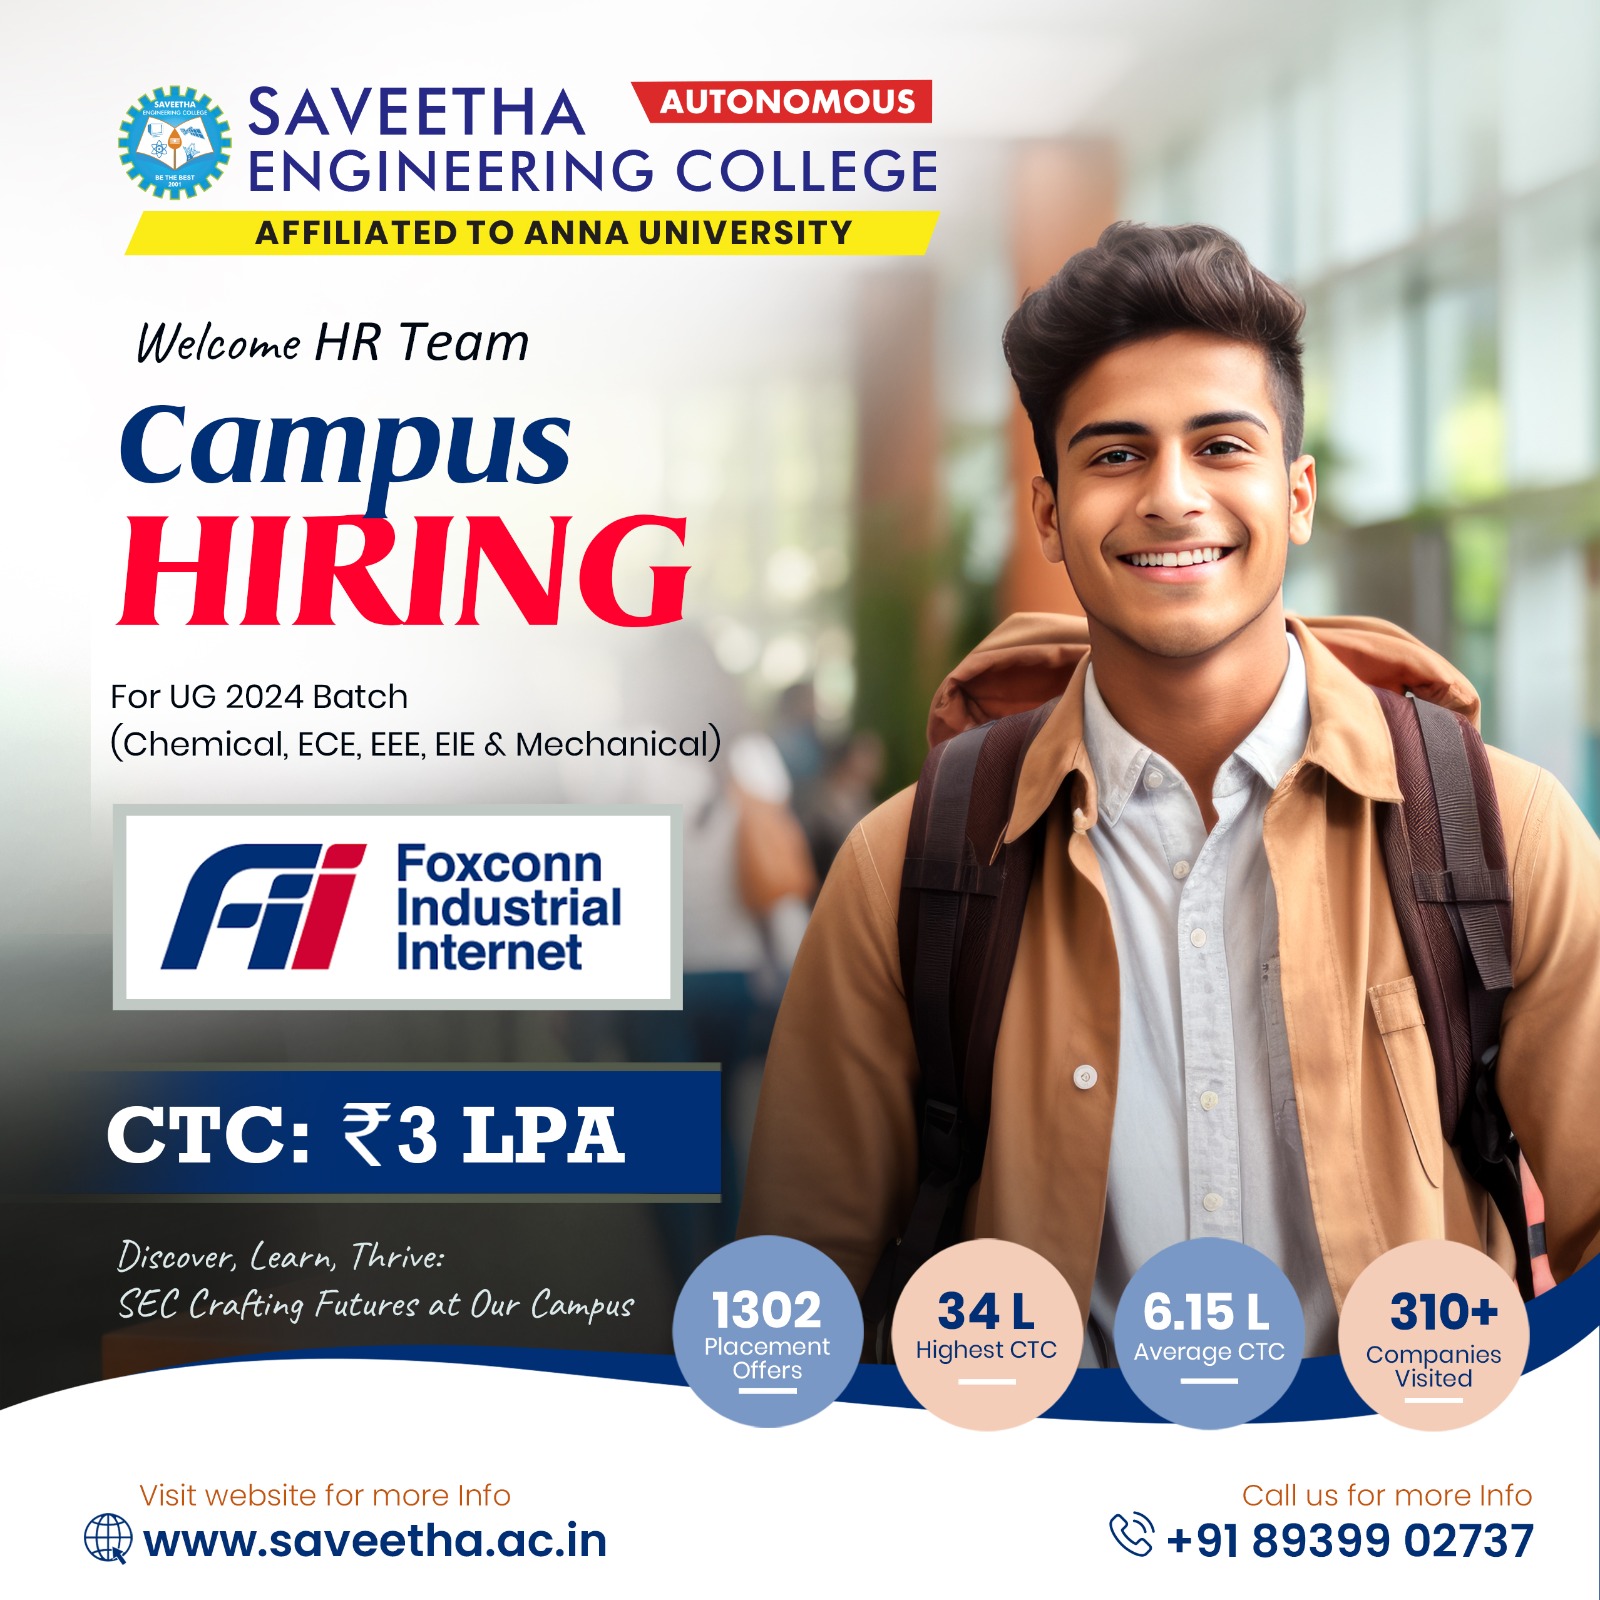 Foxconn Placement drive at Saveetha Engineering College